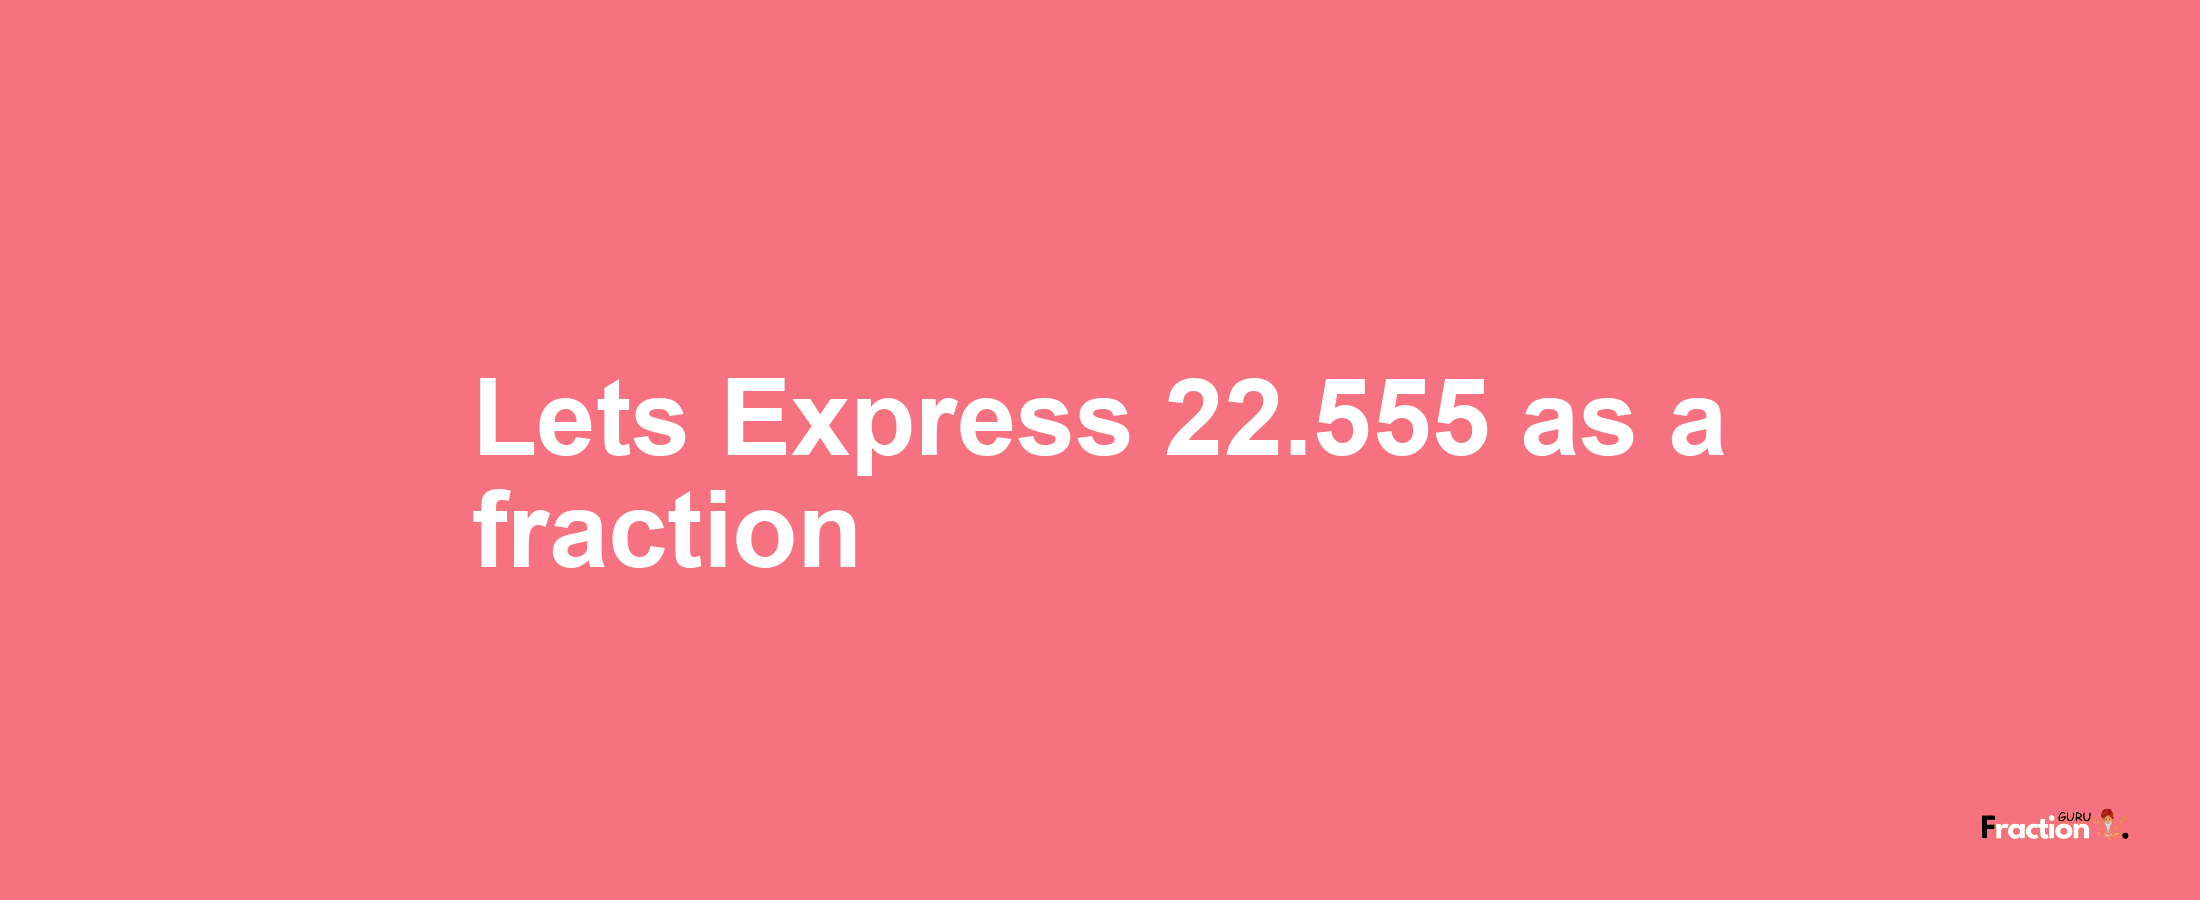 Lets Express 22.555 as afraction